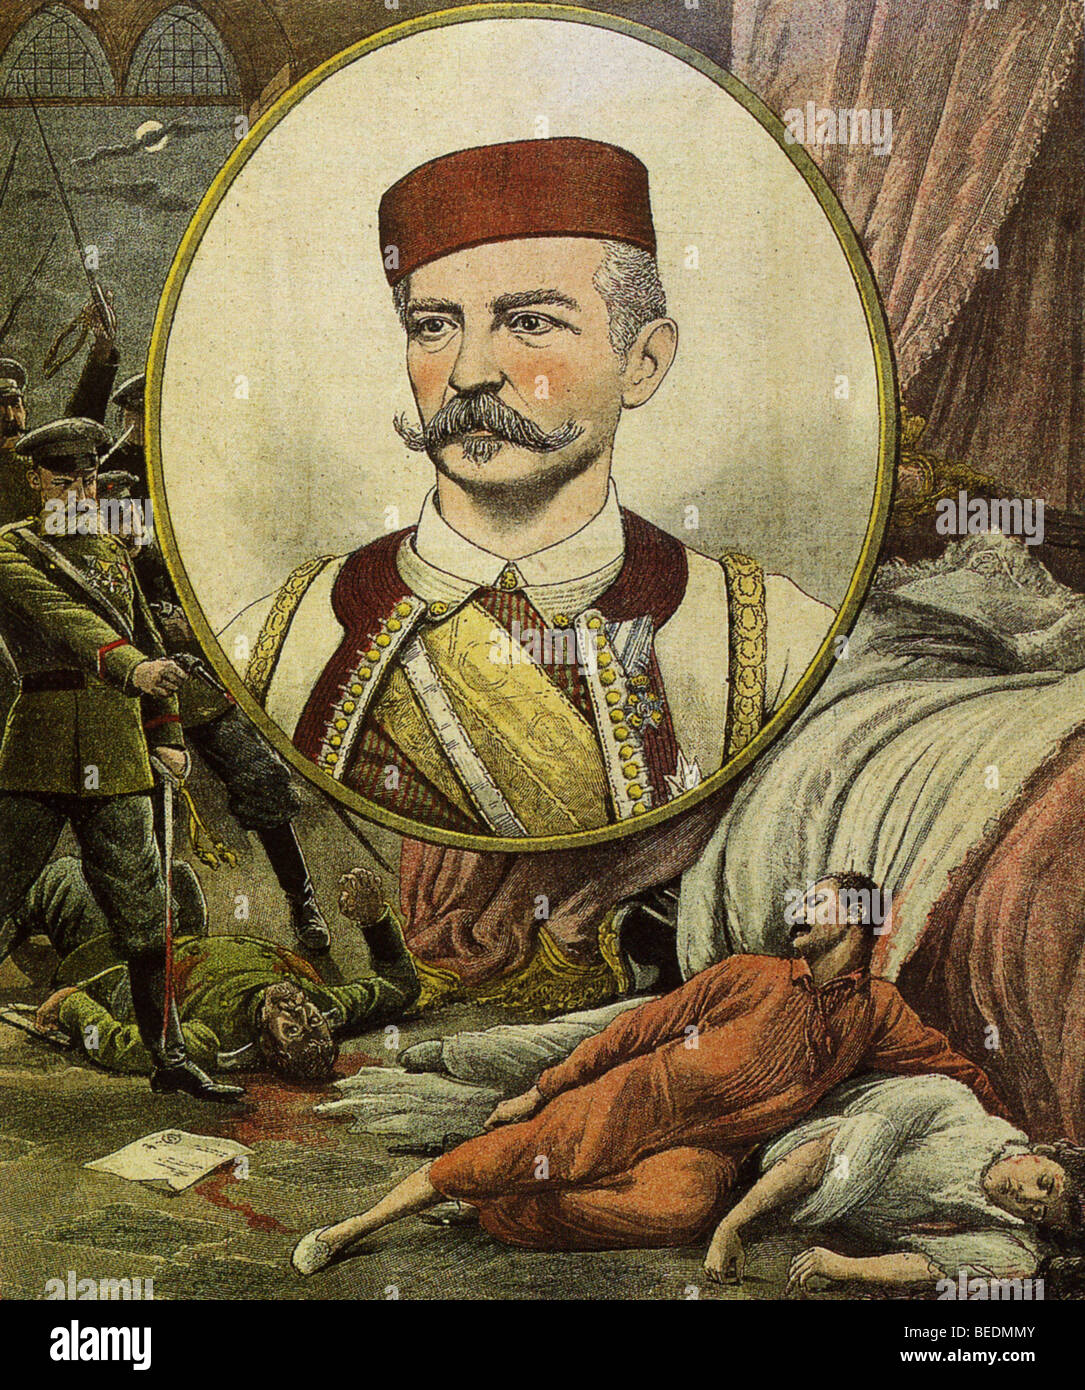 ASSASSINATION OF KING ALEXANDER I OF SERBIA along with his wife iın 1903 with his successor Peter I shown in the portrait Stock Photo